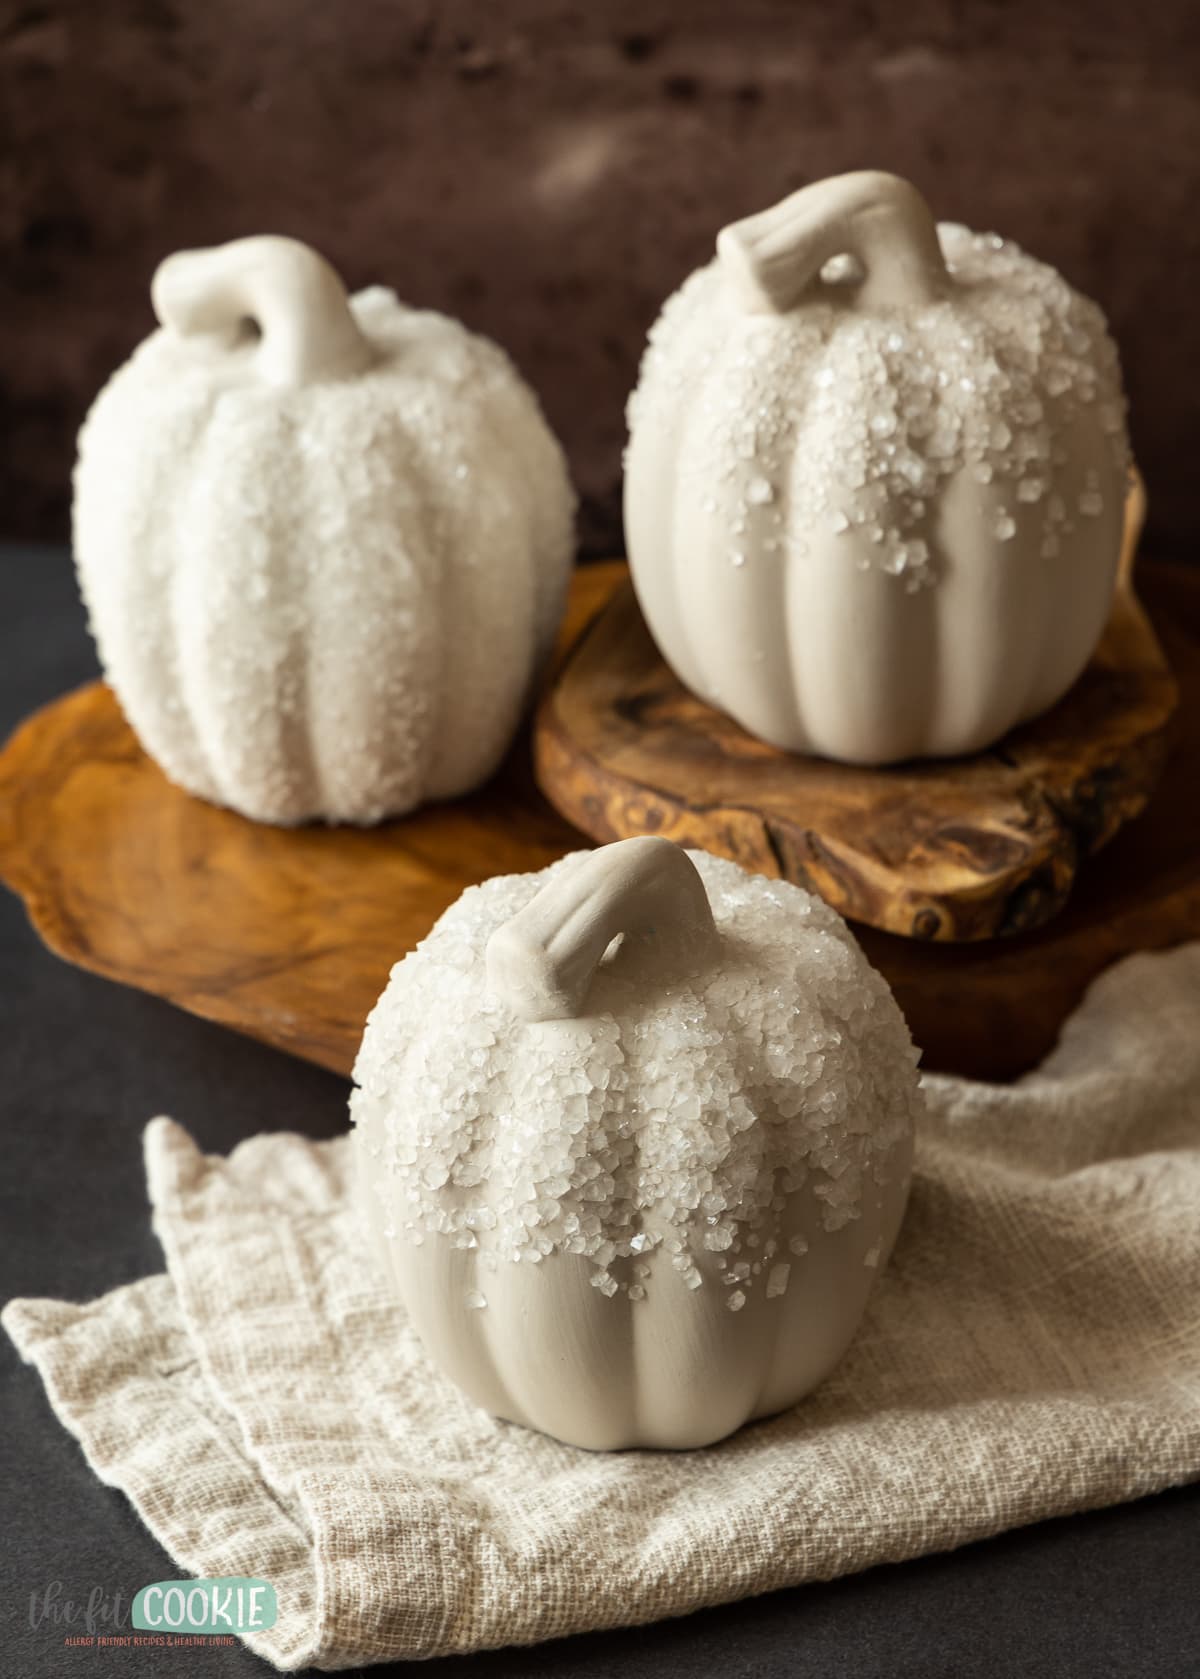 borax crystals on white pumpkins set on stacked pieces of wood. 